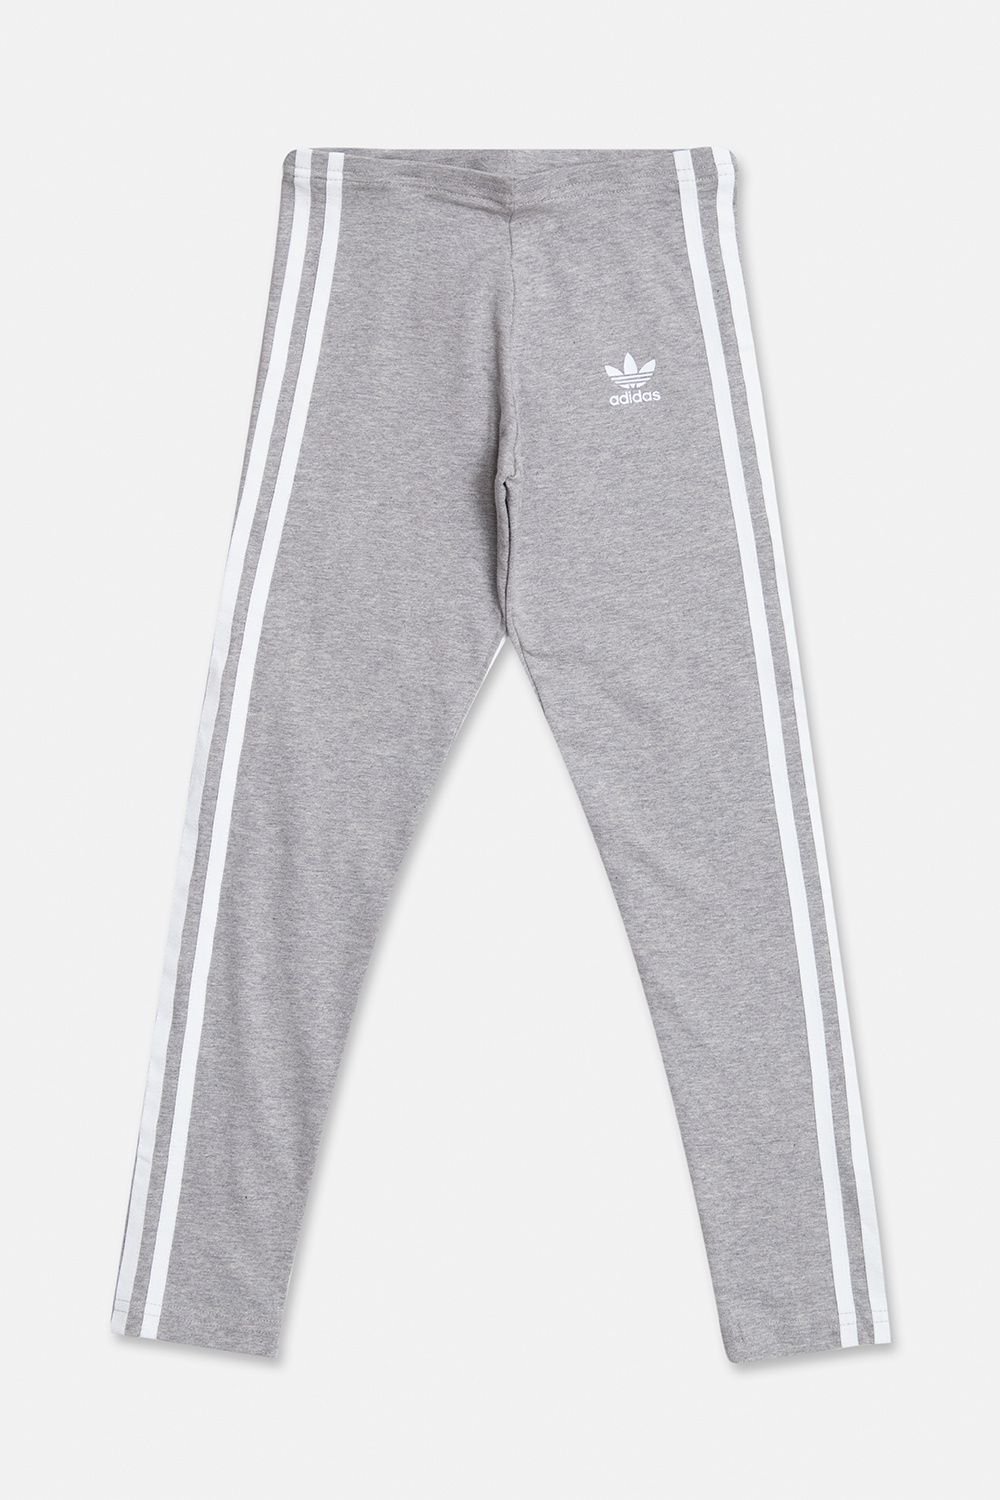 Grey adidas essential 3 stripe pants ladies ADIDAS Kids - adidas track  uniforms apparel for sale by owner - Extension-fmedShops GB